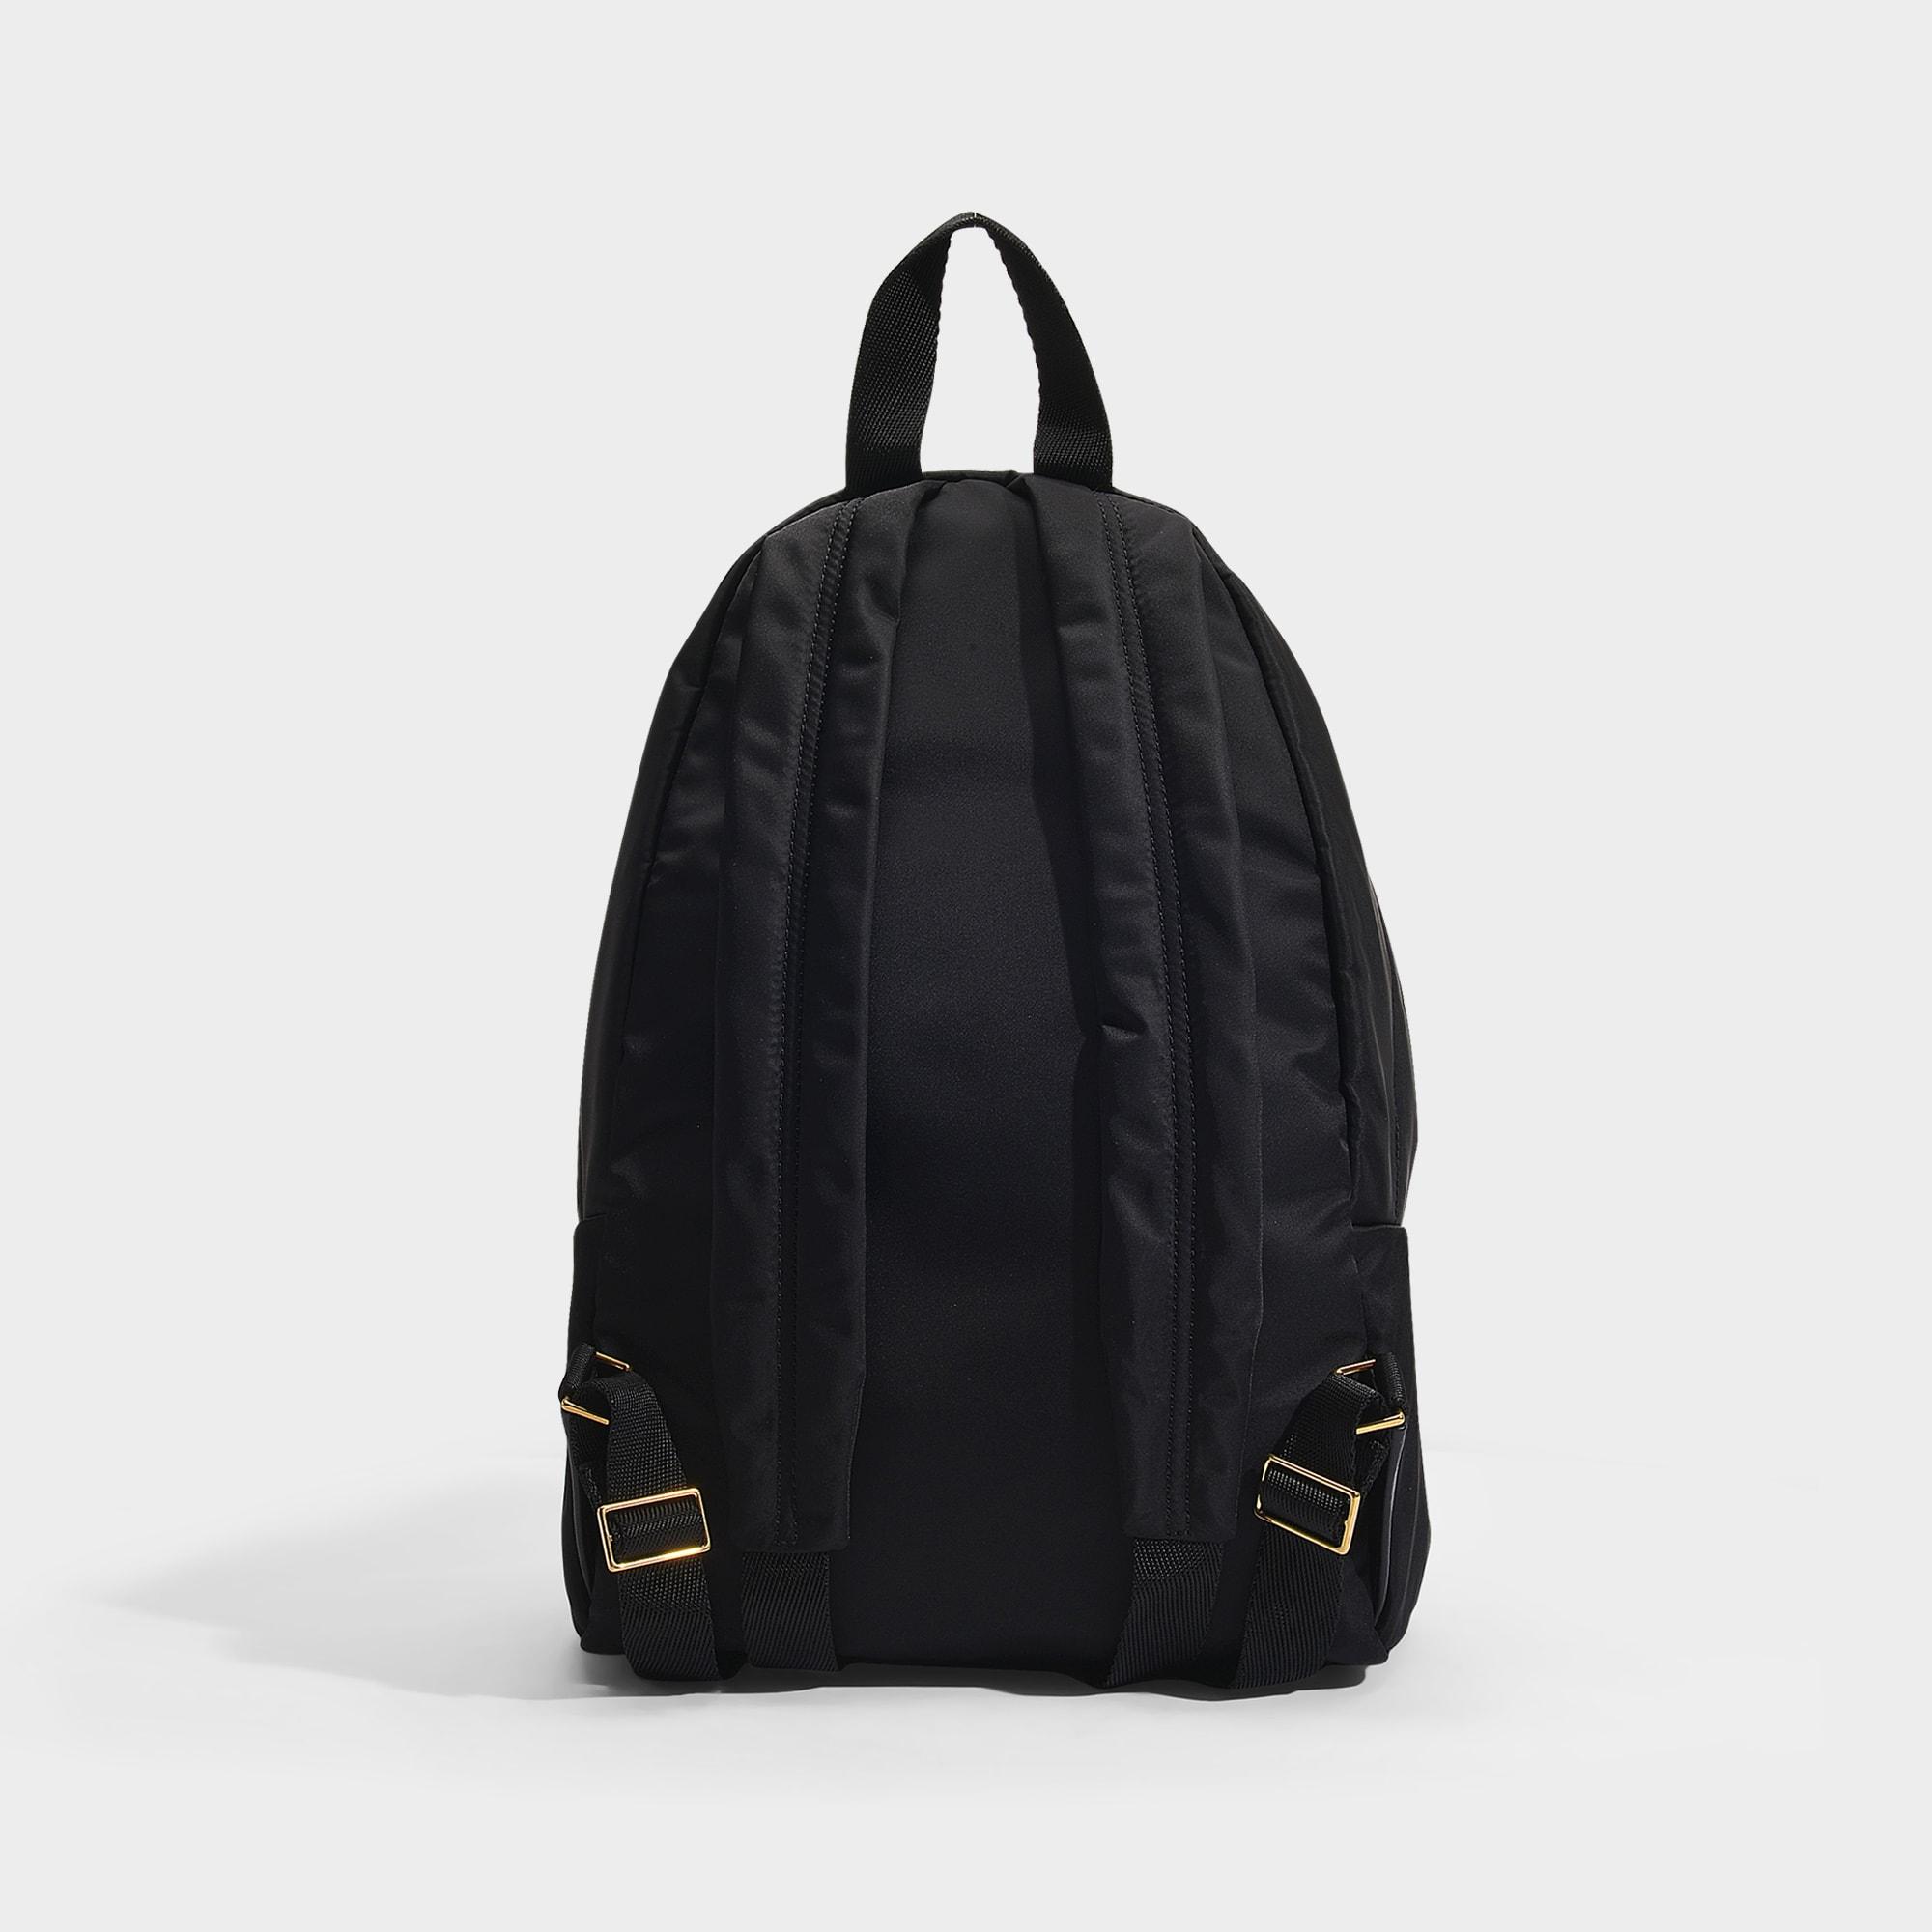 Anya Hindmarch Synthetic Multi Pocket Backpack In Black Nylon - Lyst